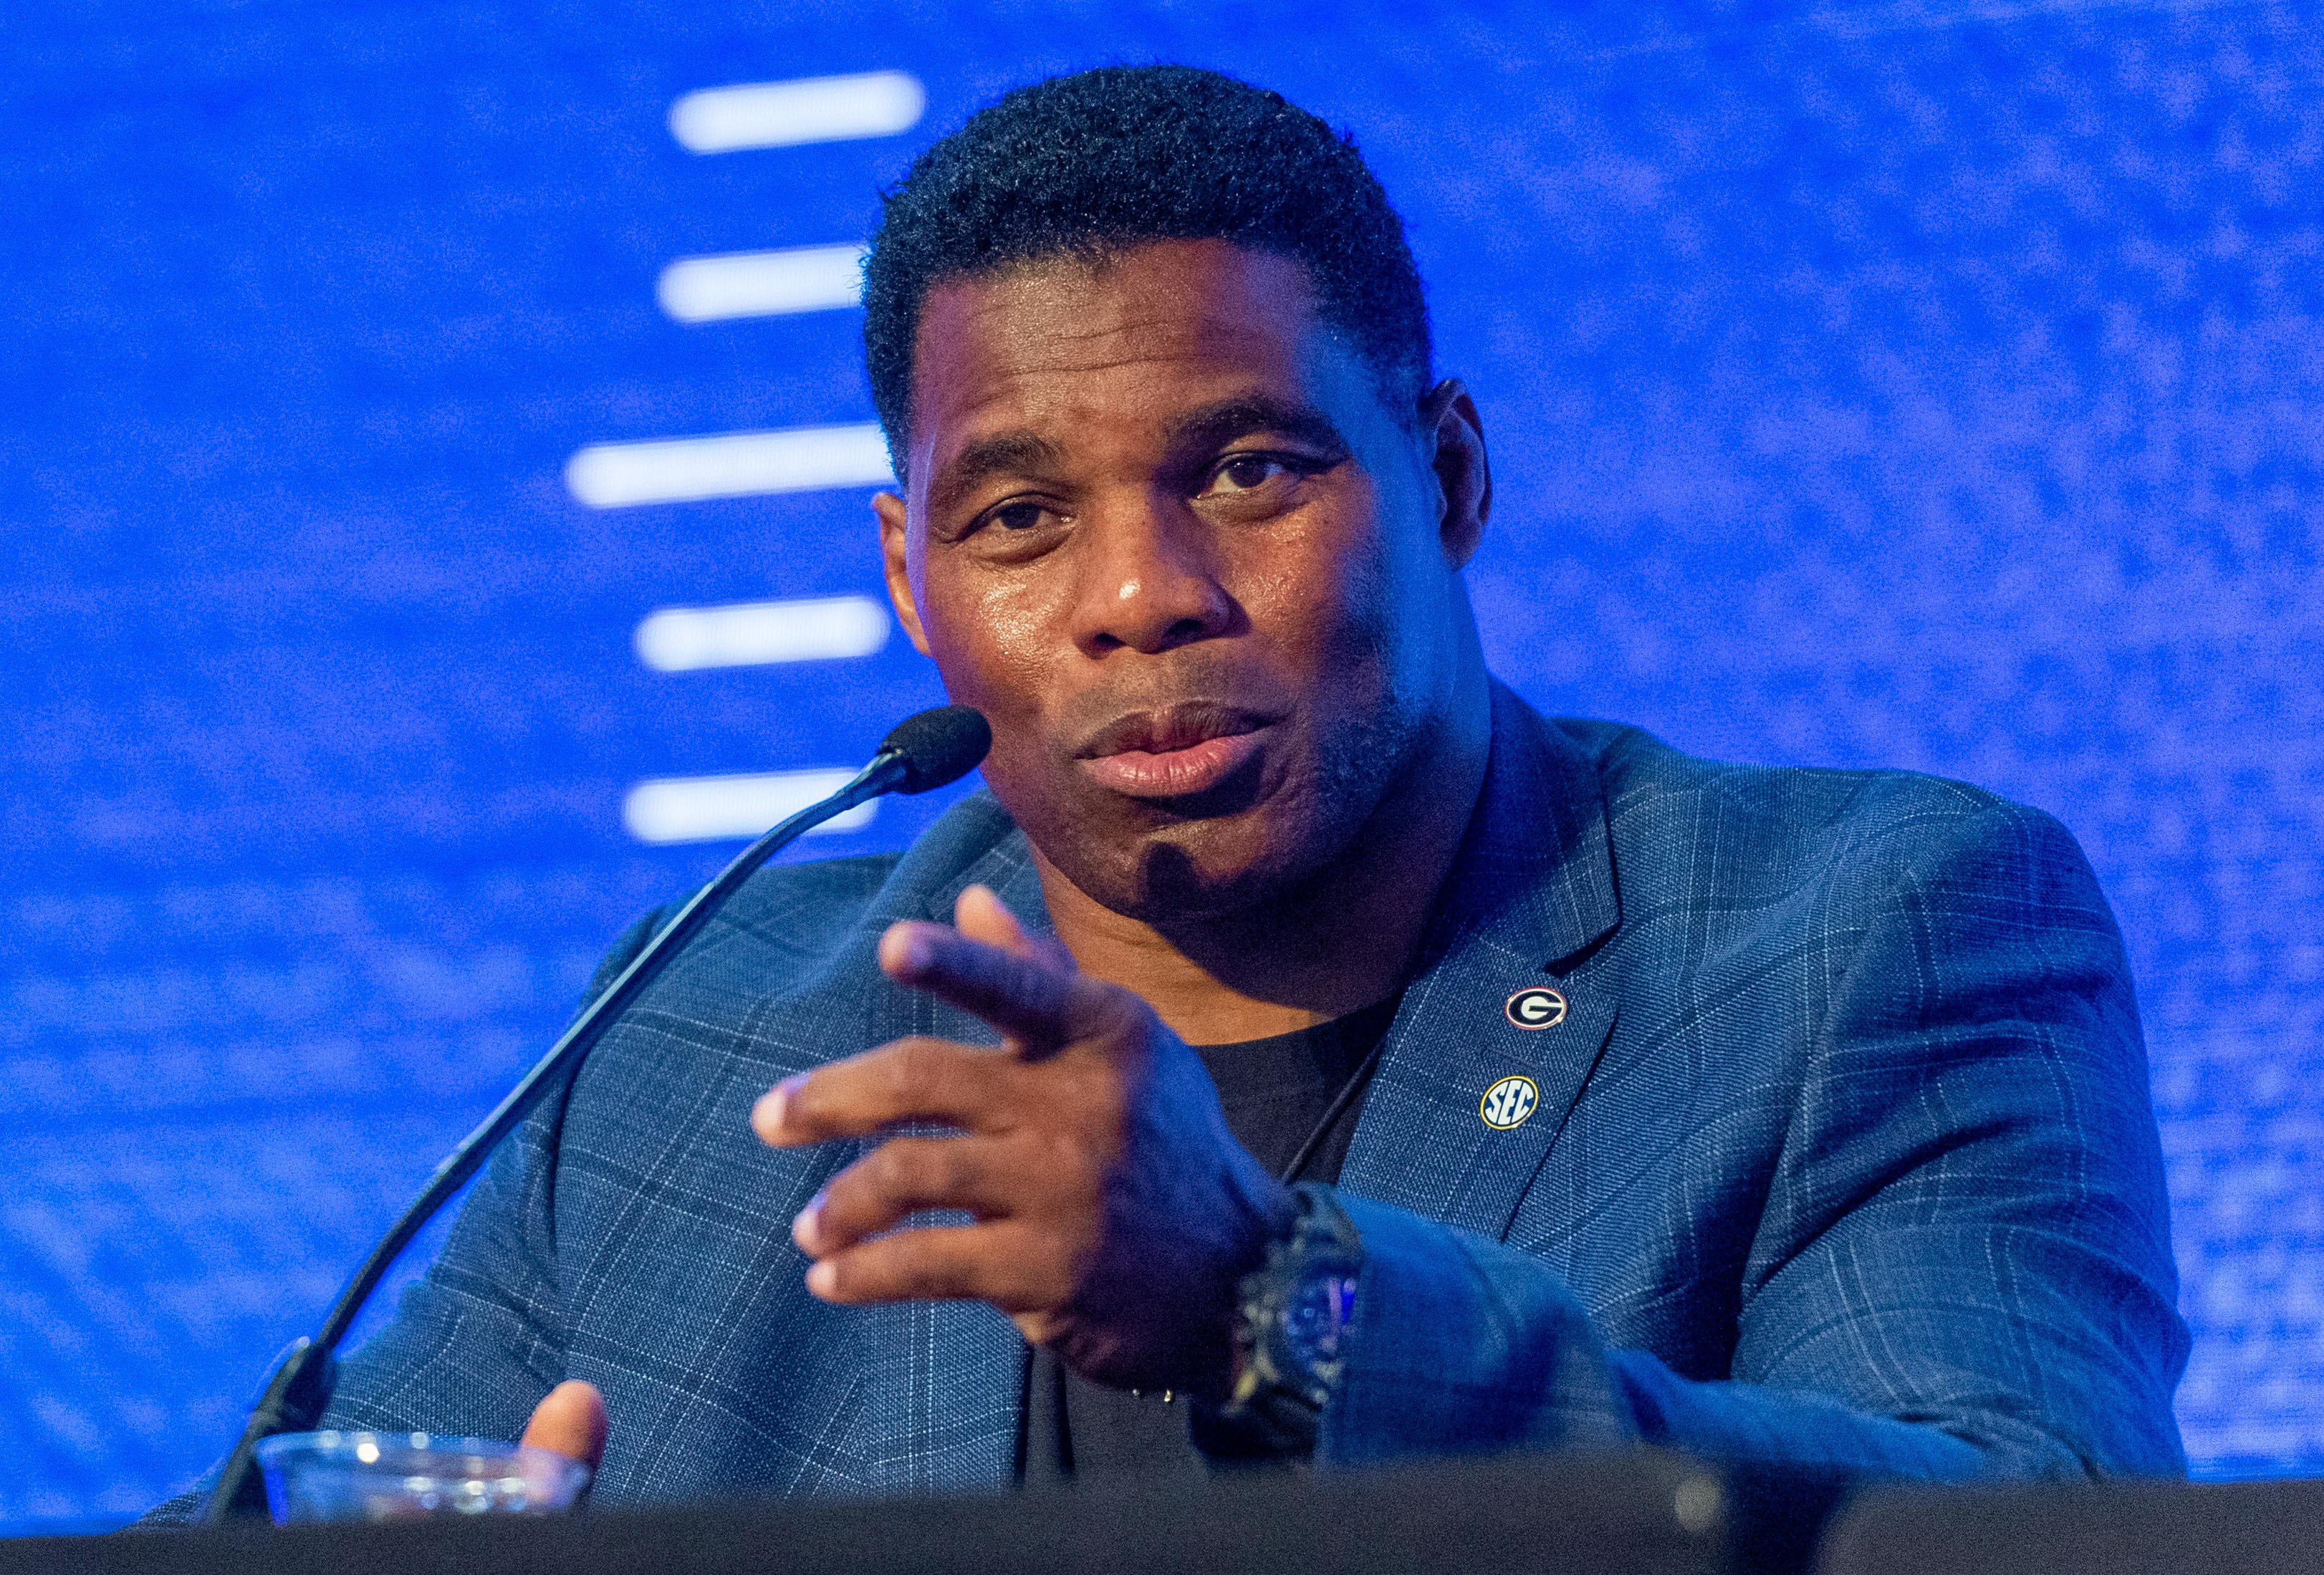 Herschel Walker speaks during the SEC Legends panel featuring Walker and Archie Manning and Steve Spurrier discussing 150 years of college football with the media at the Hyatt Regency-Birmingham.